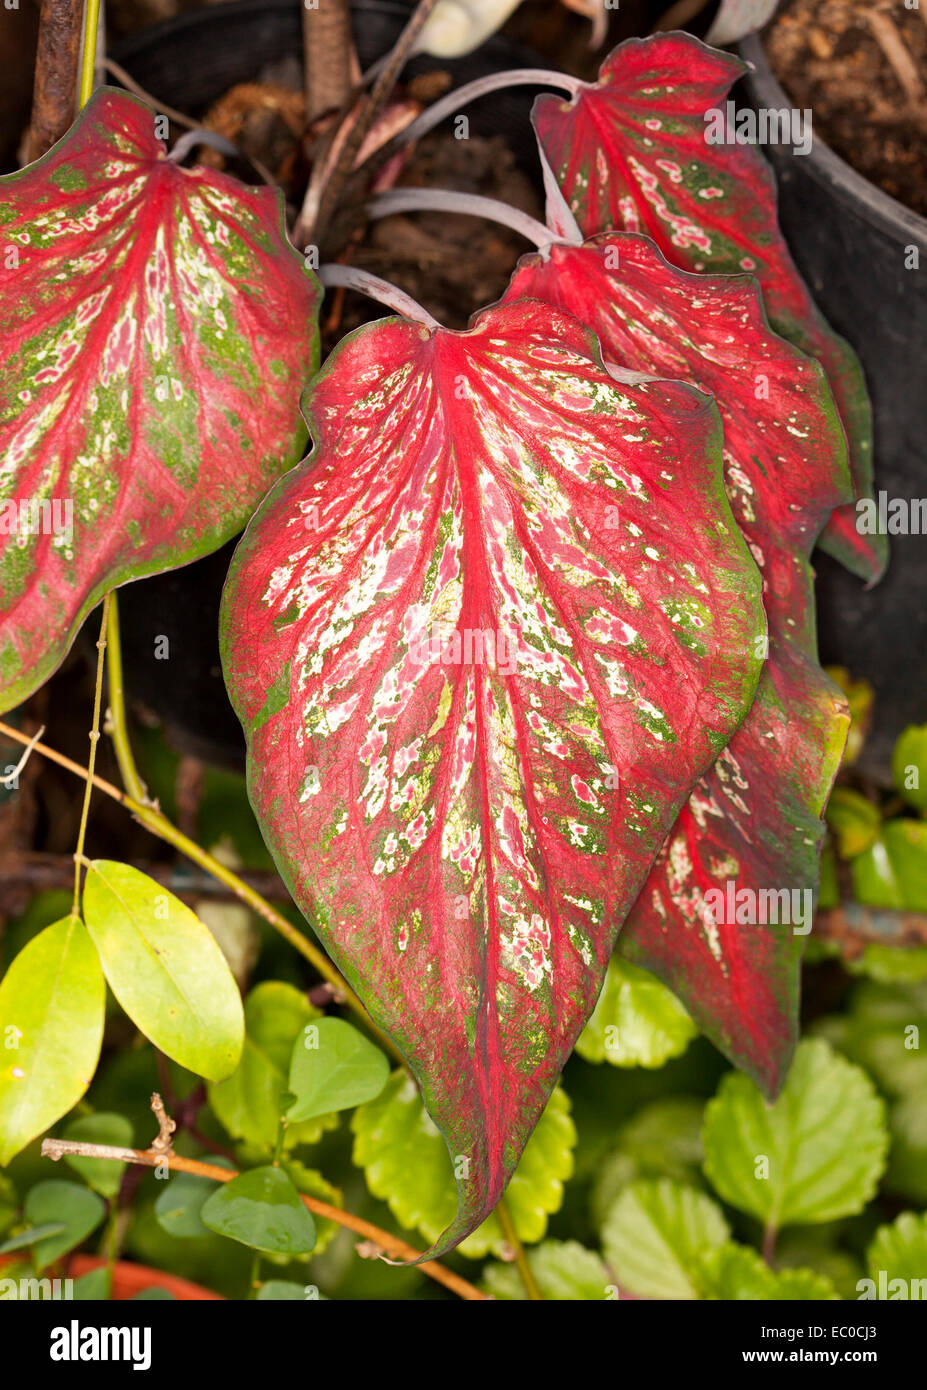 Group of spectacular & unusual caladium leaves, vivid red with splashes of white and green edges Stock Photo